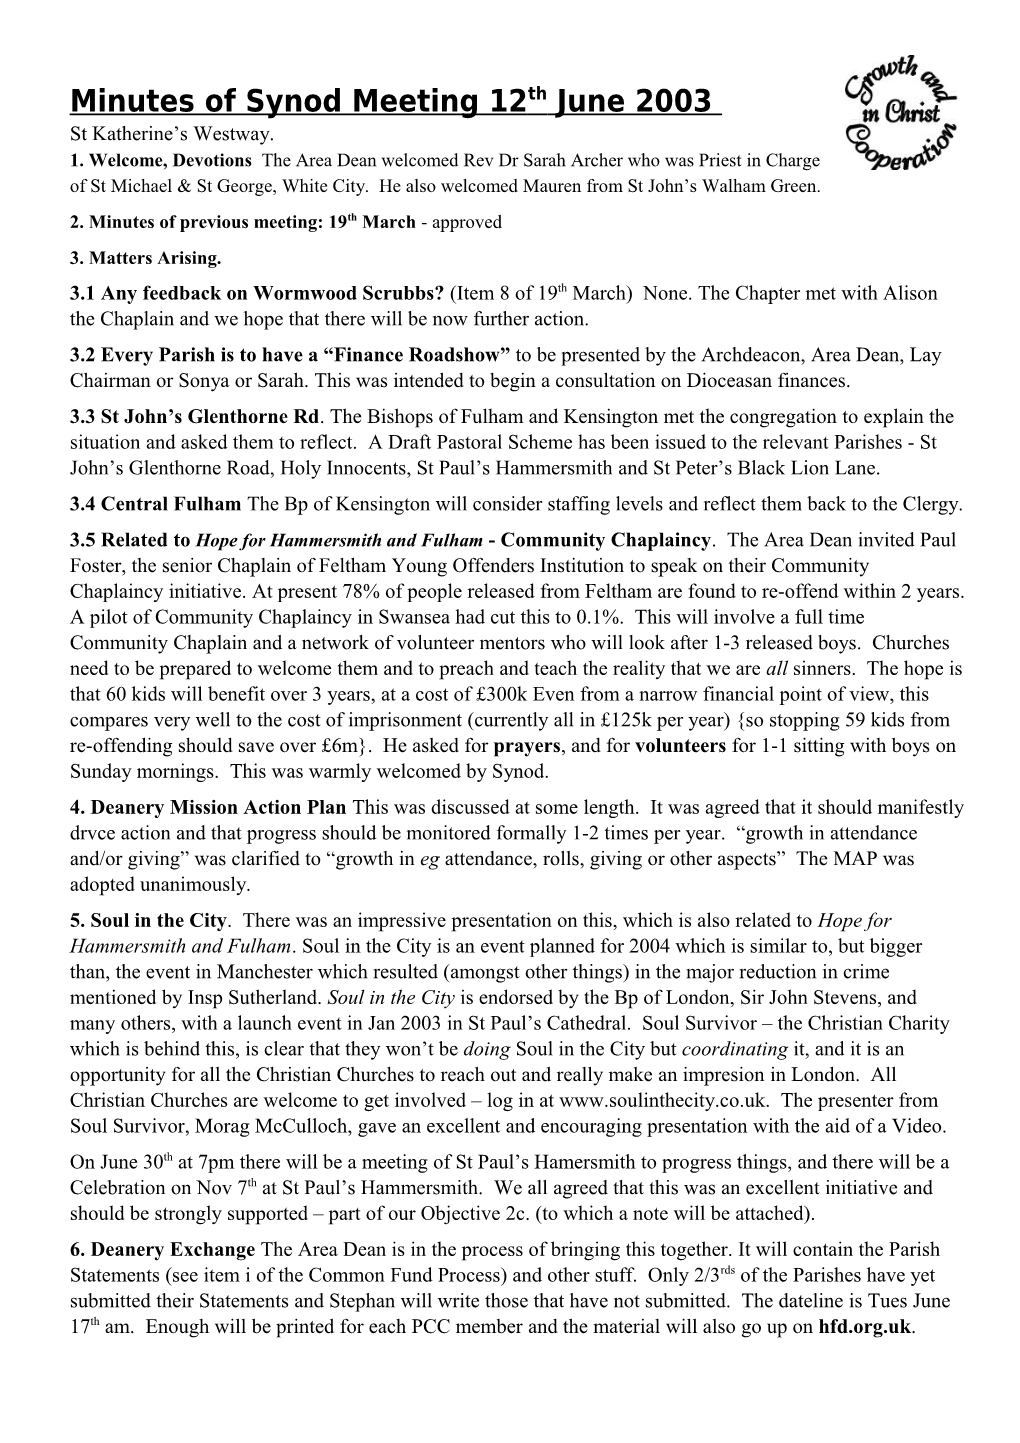 Agenda for Synod Meeting 12Th Sept 2002